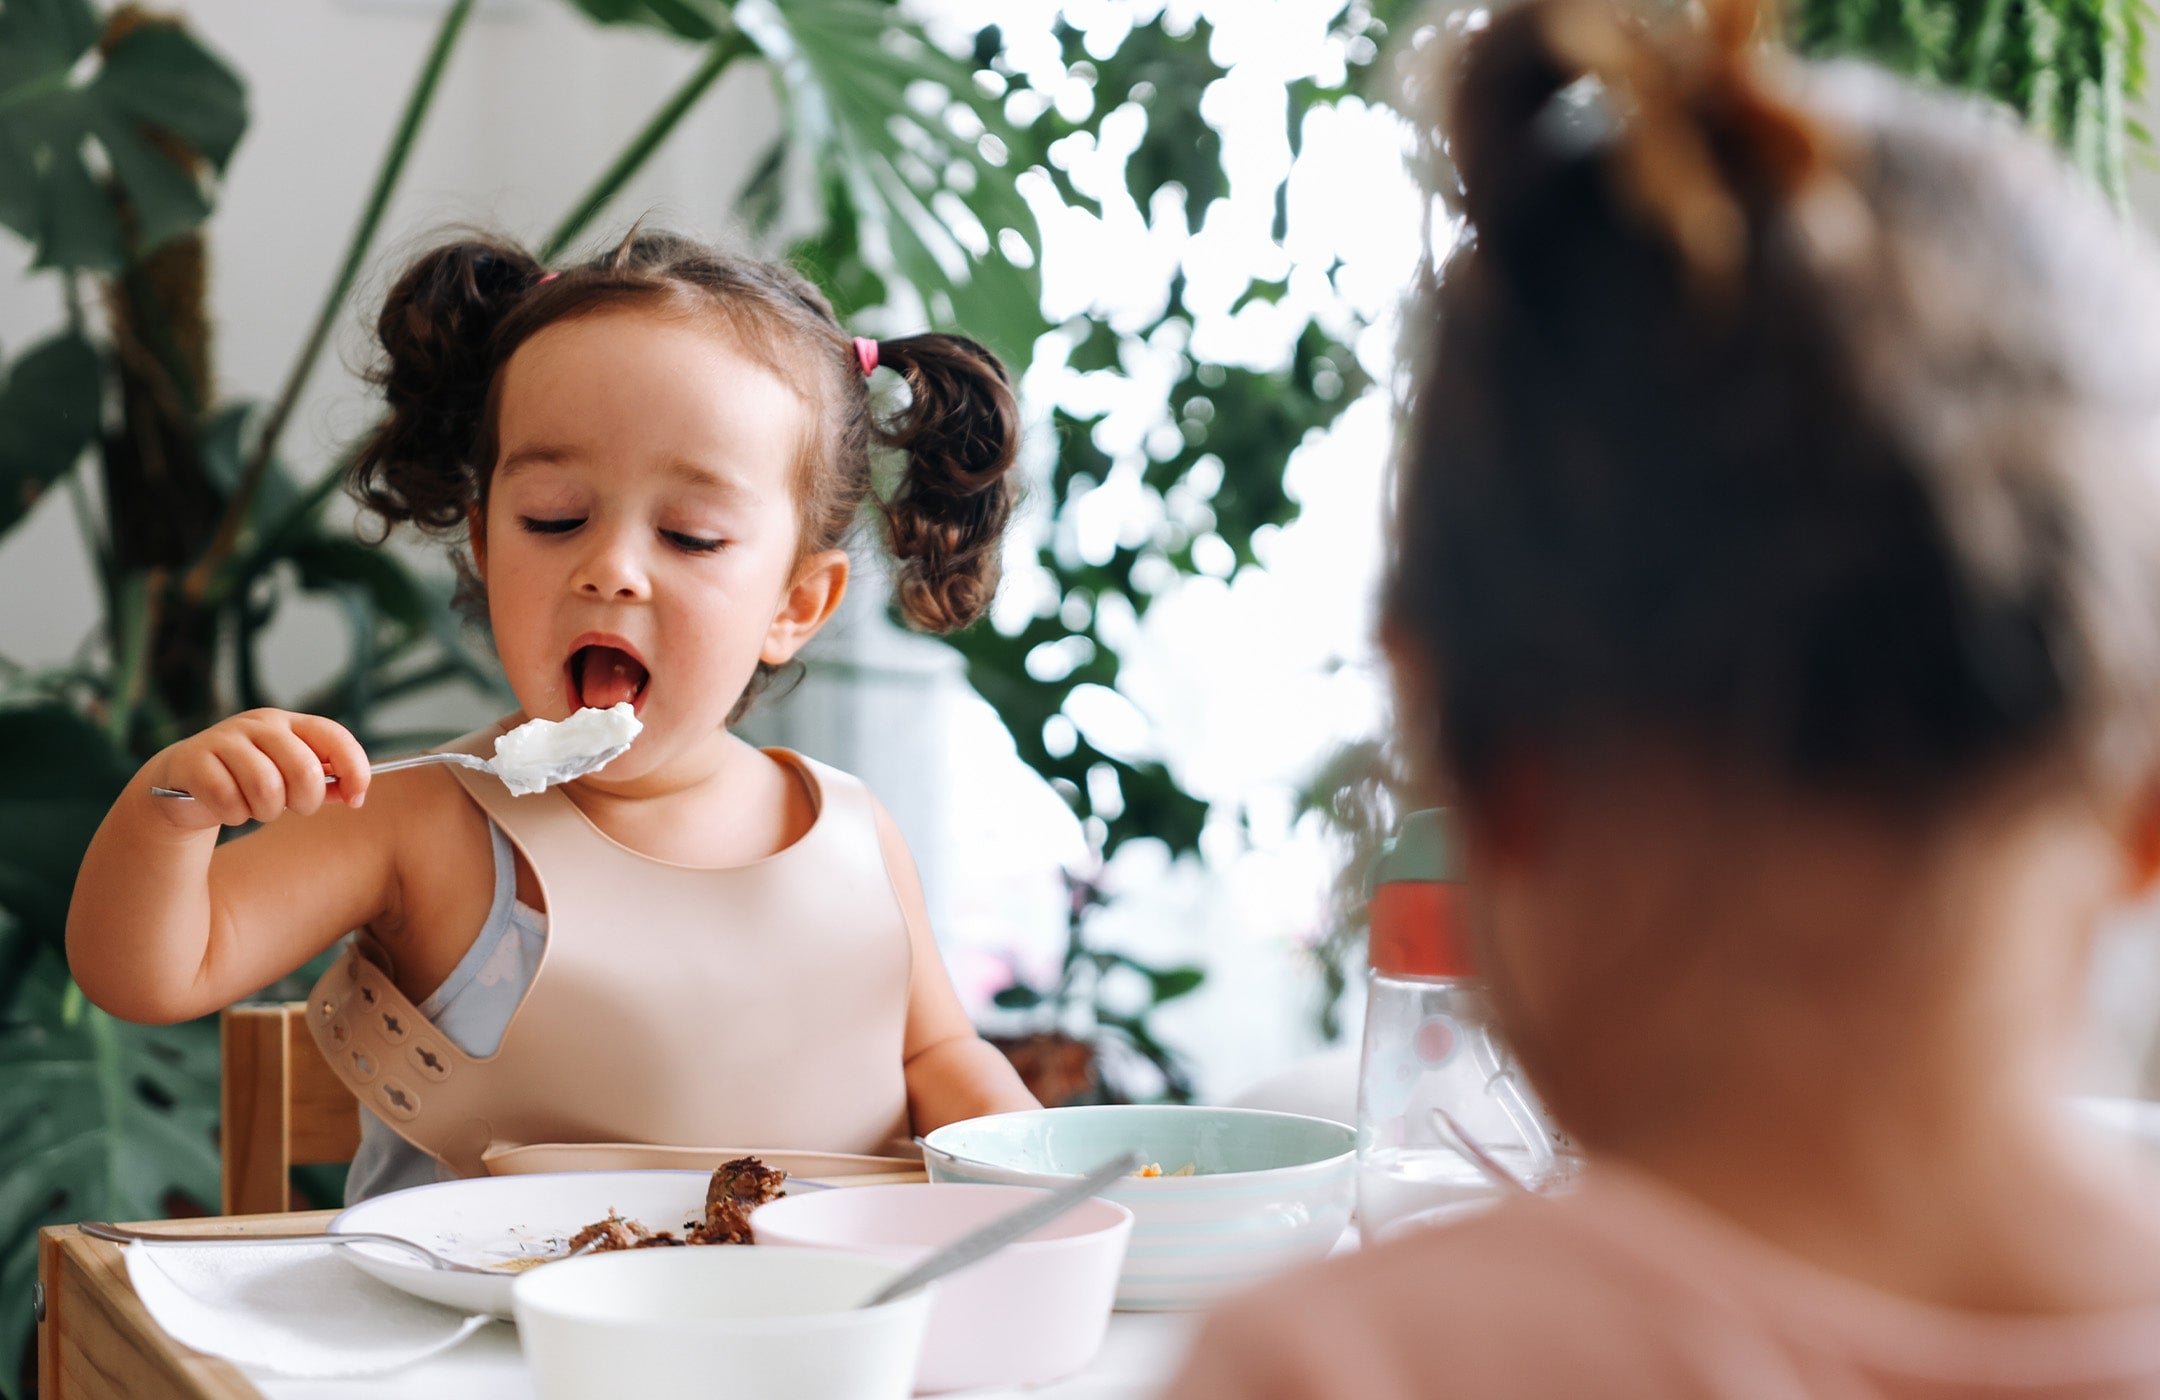 How Does Non-Dairy Yogurt Compare to Regular Yogurt for Kids? We Asked an Expert.